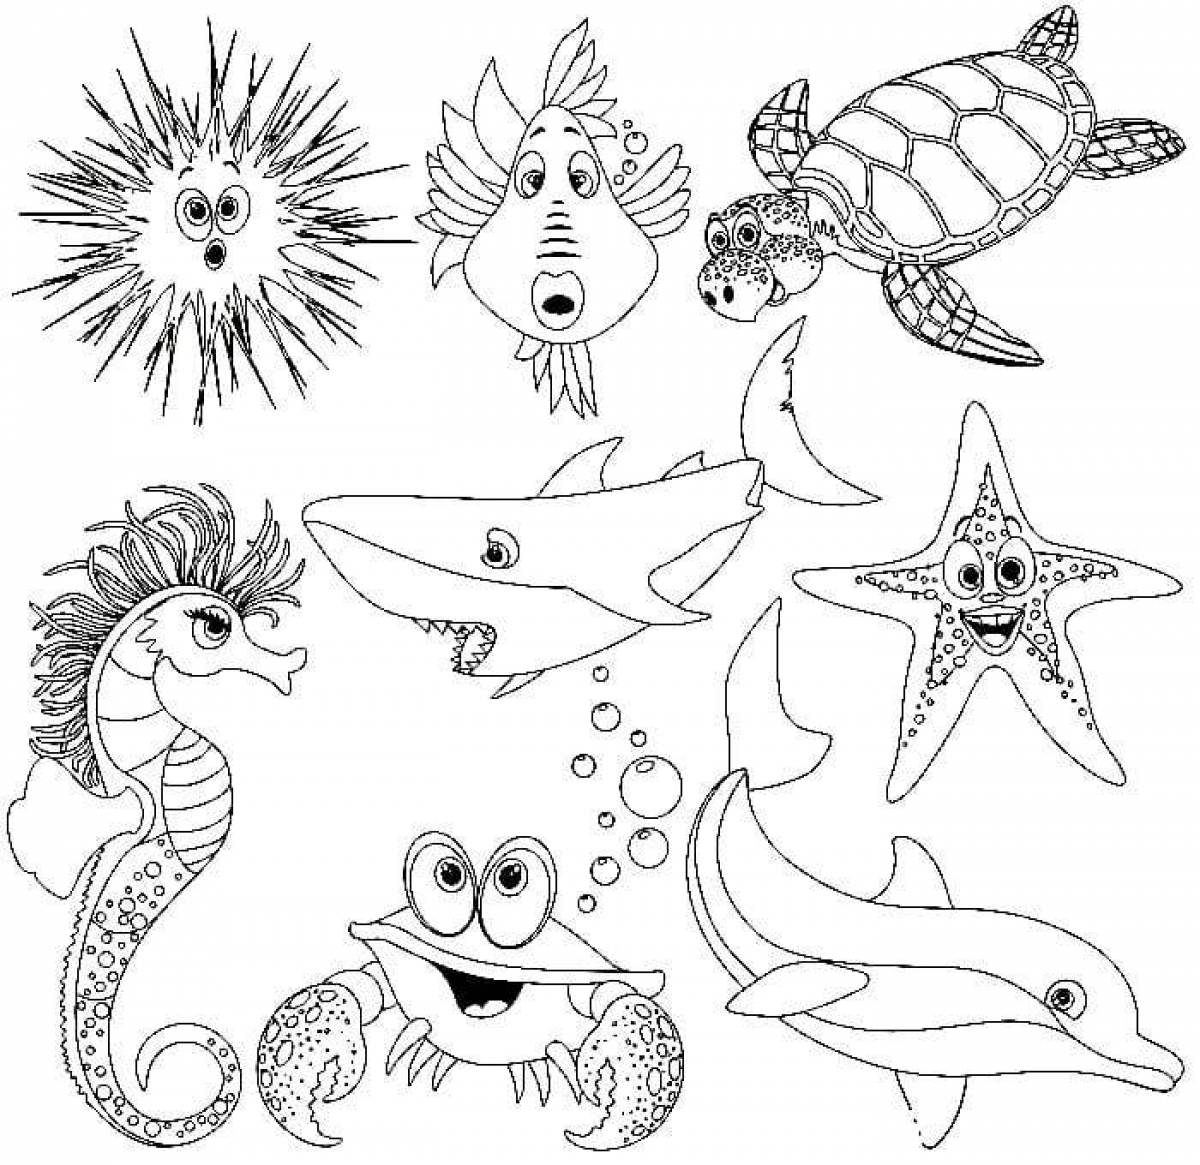 Fine sea creature coloring pages